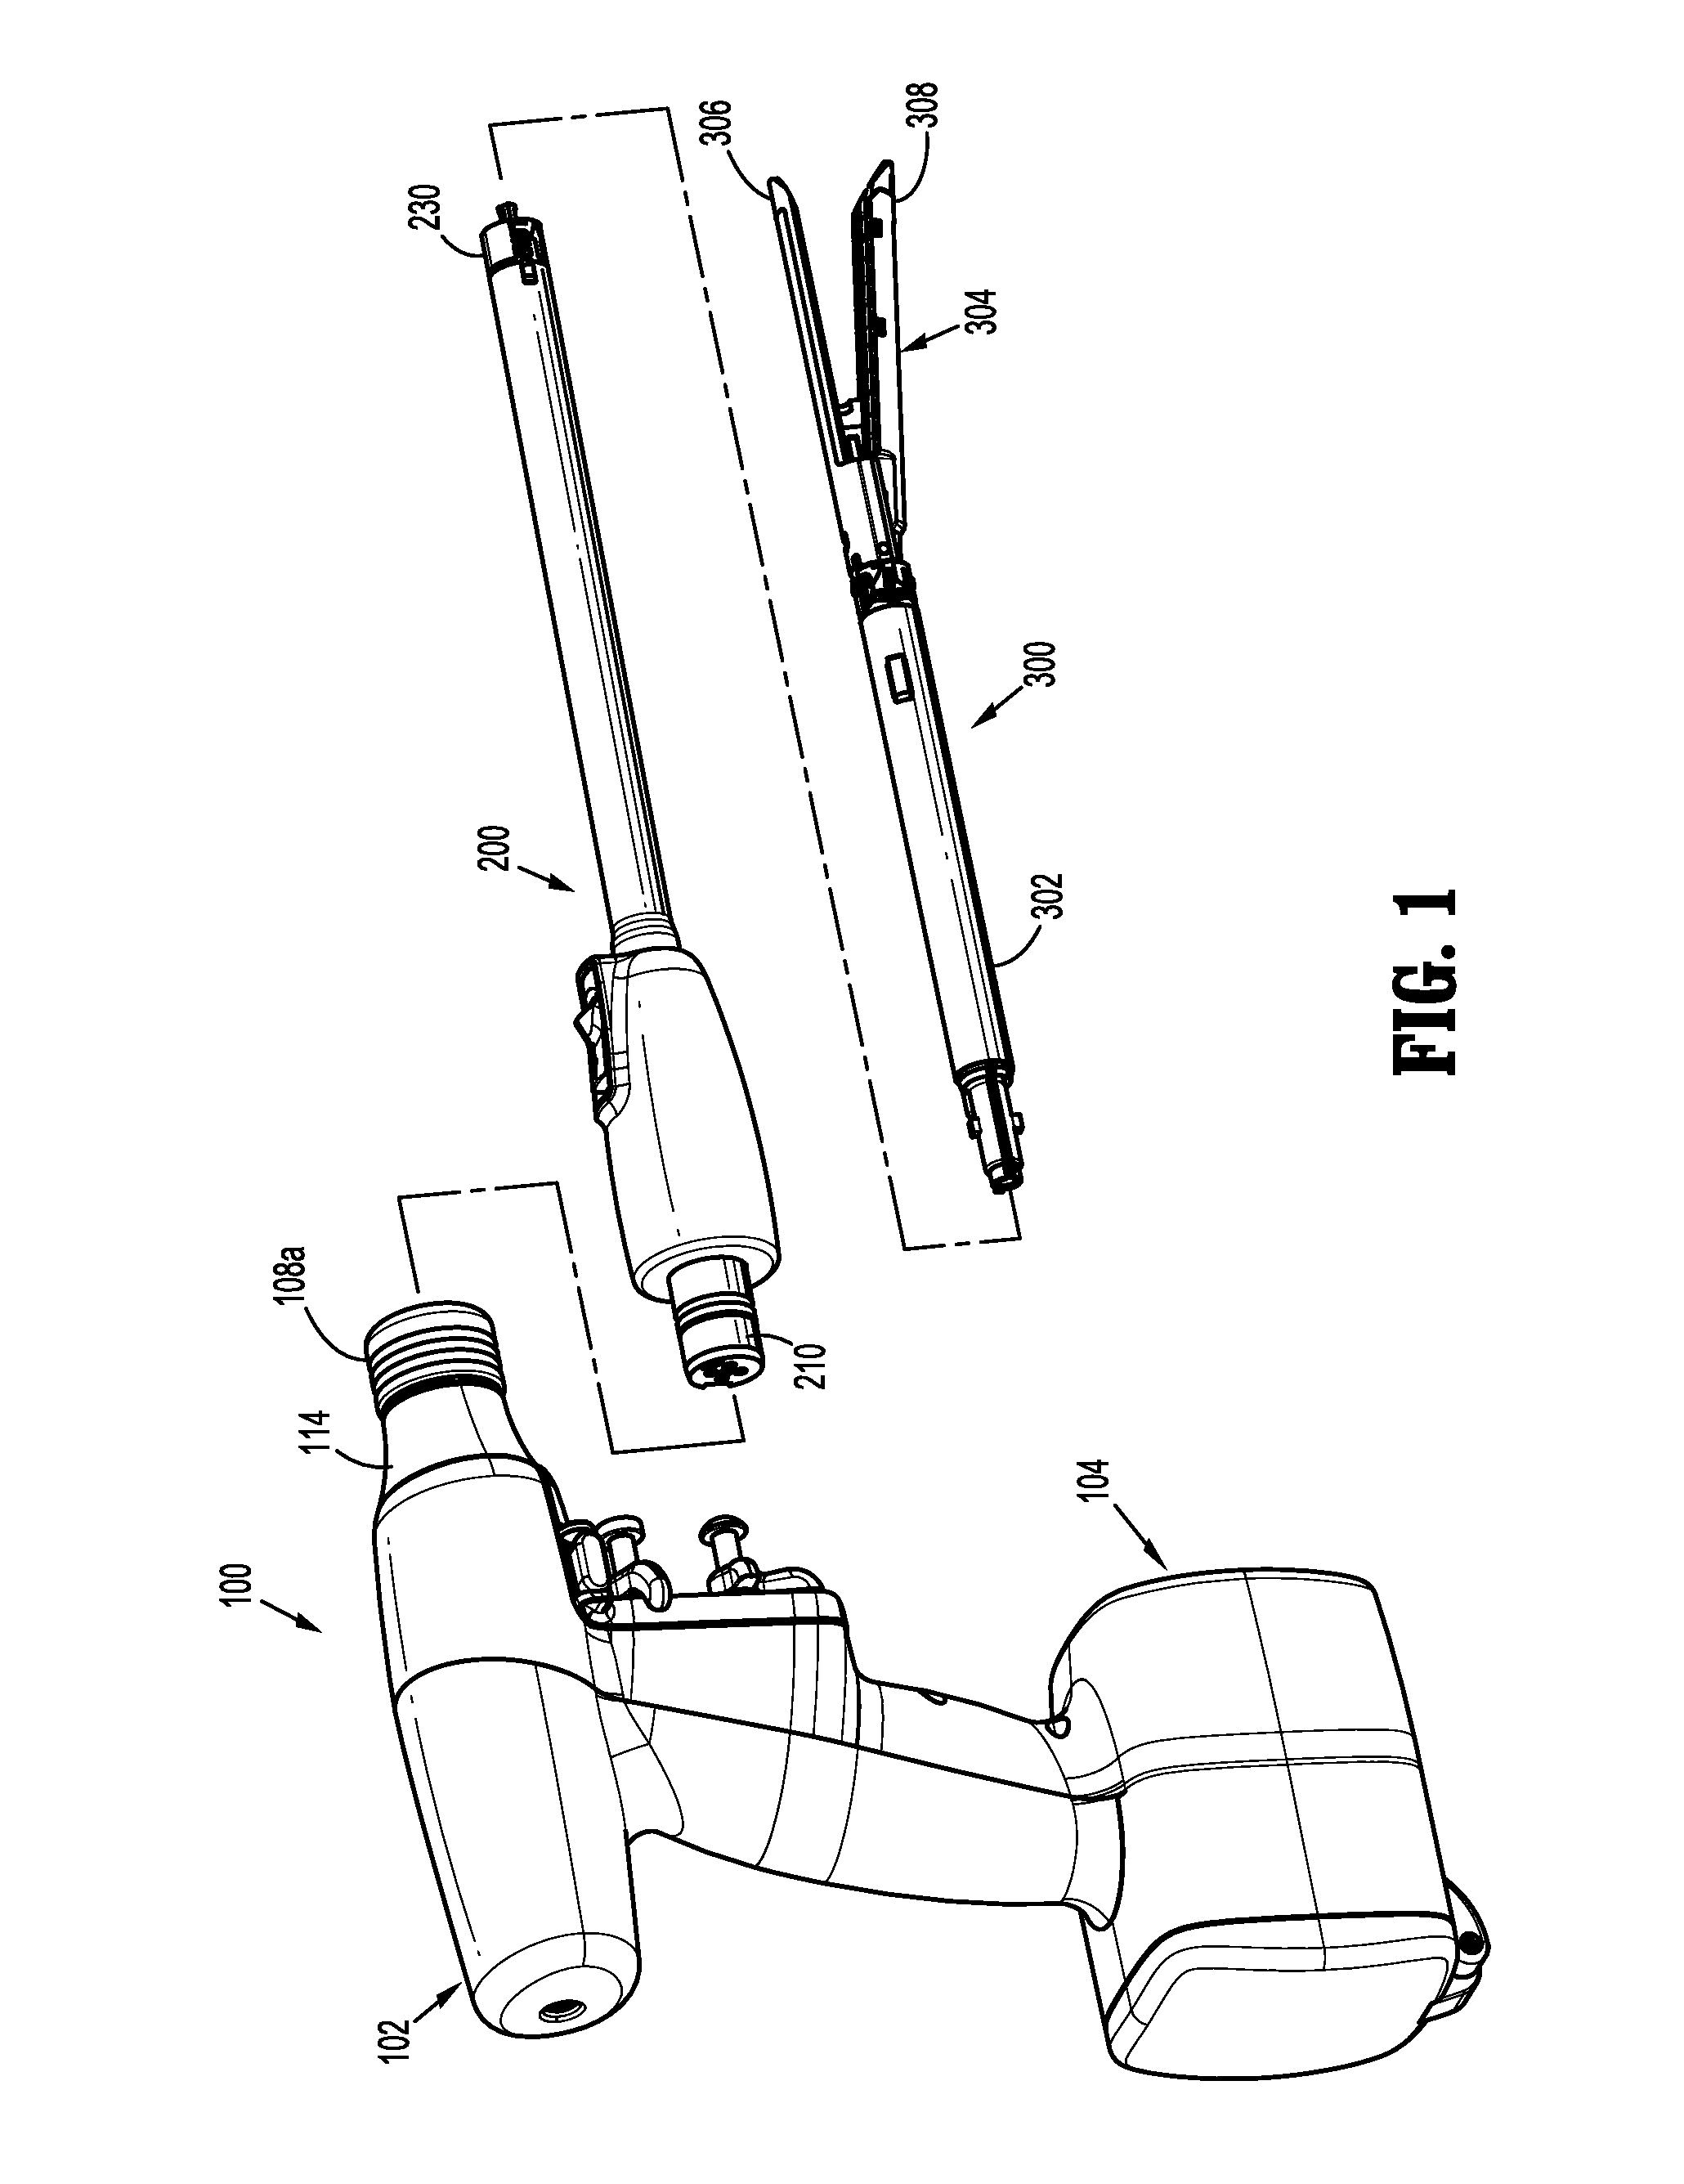 Surgical adapter assemblies for use between surgical handle assembly and surgical end effectors